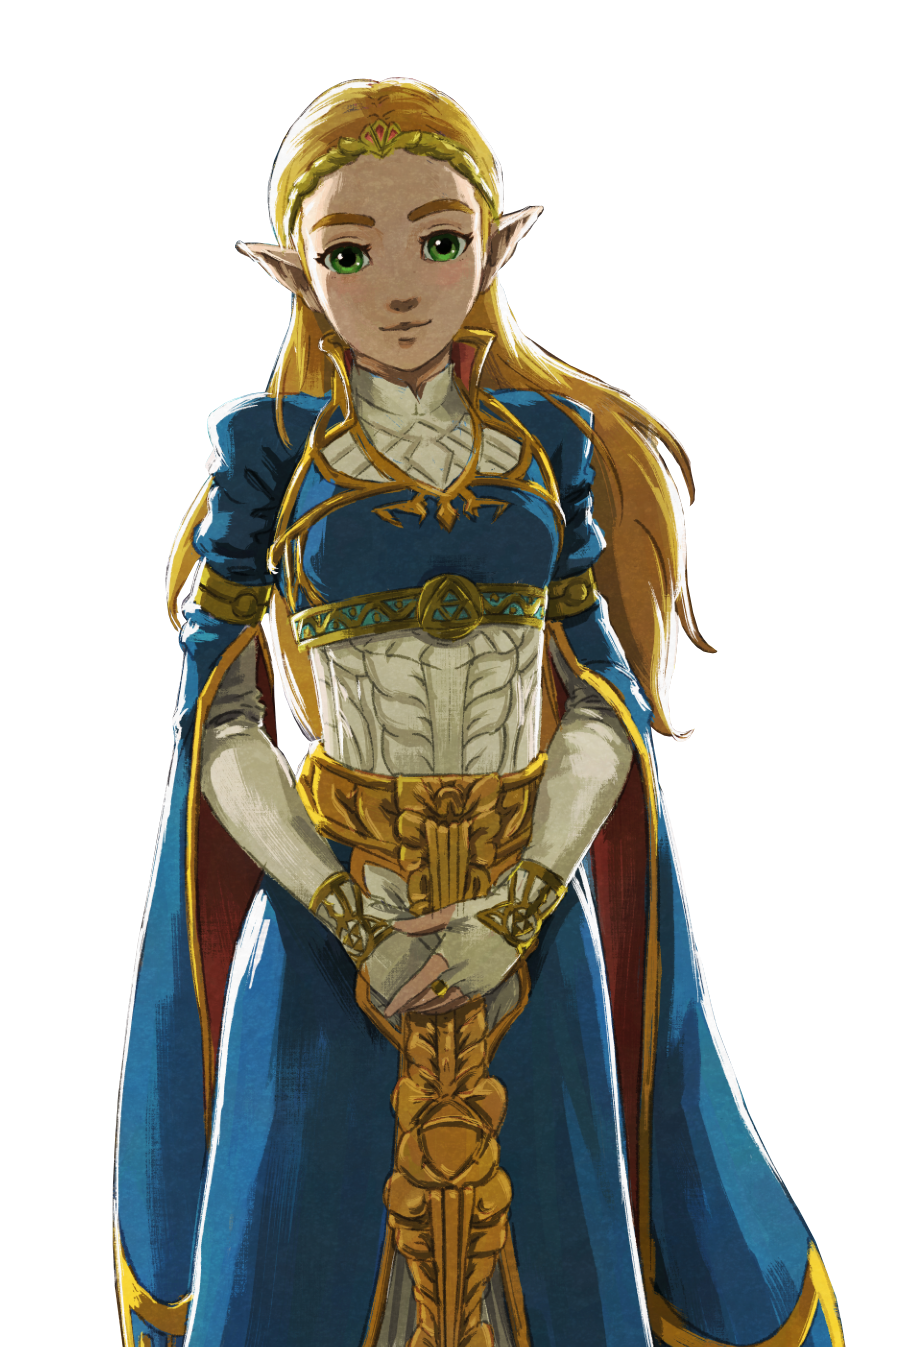 Mythical Of Character Zelda Fictional Princess Breath PNG Image